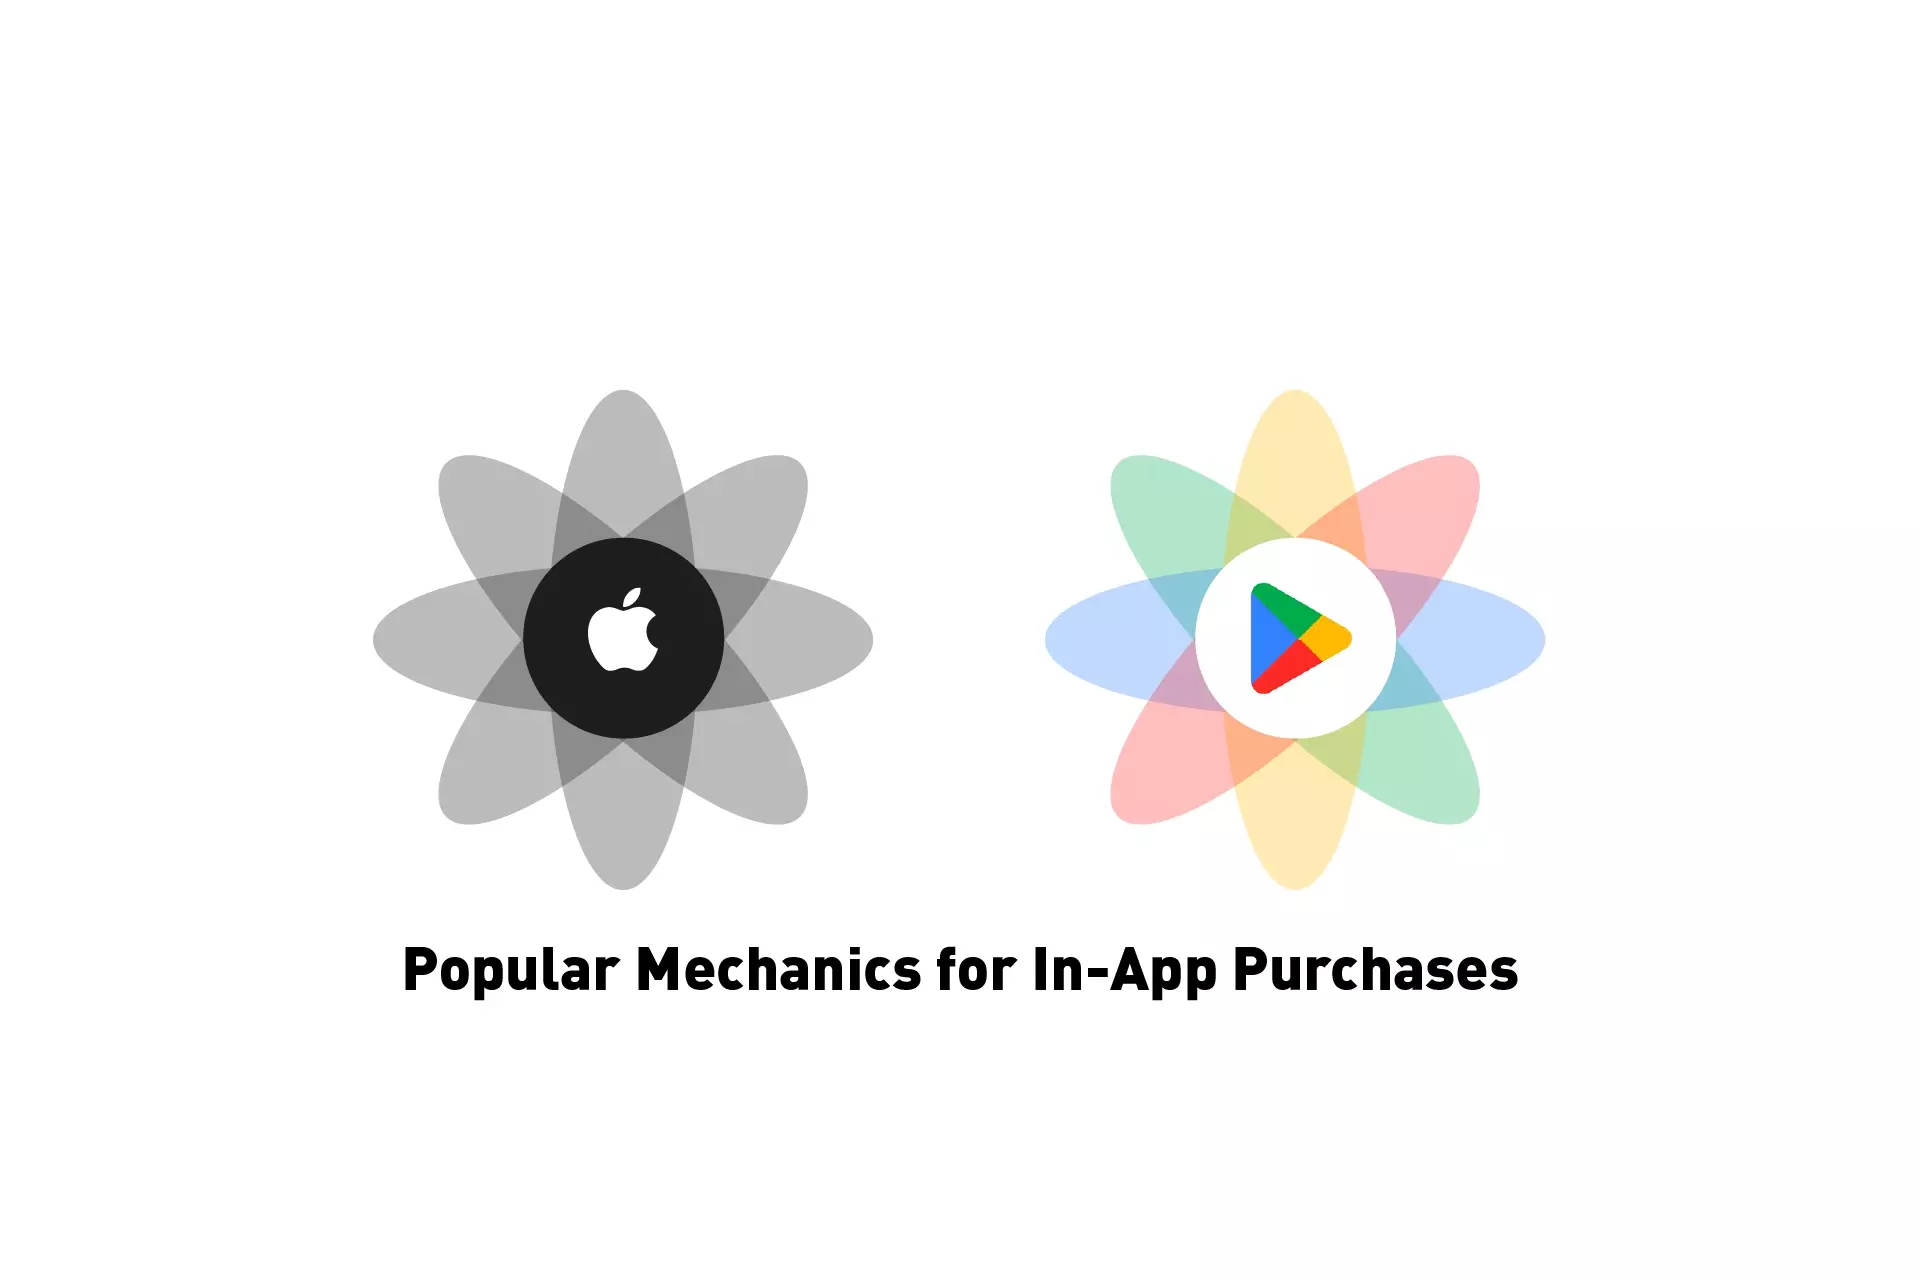 Two flowers that represent Apple and the Google Play Store side by side. Beneath them sits the text "Popular Mechanics for In-App Purchases."